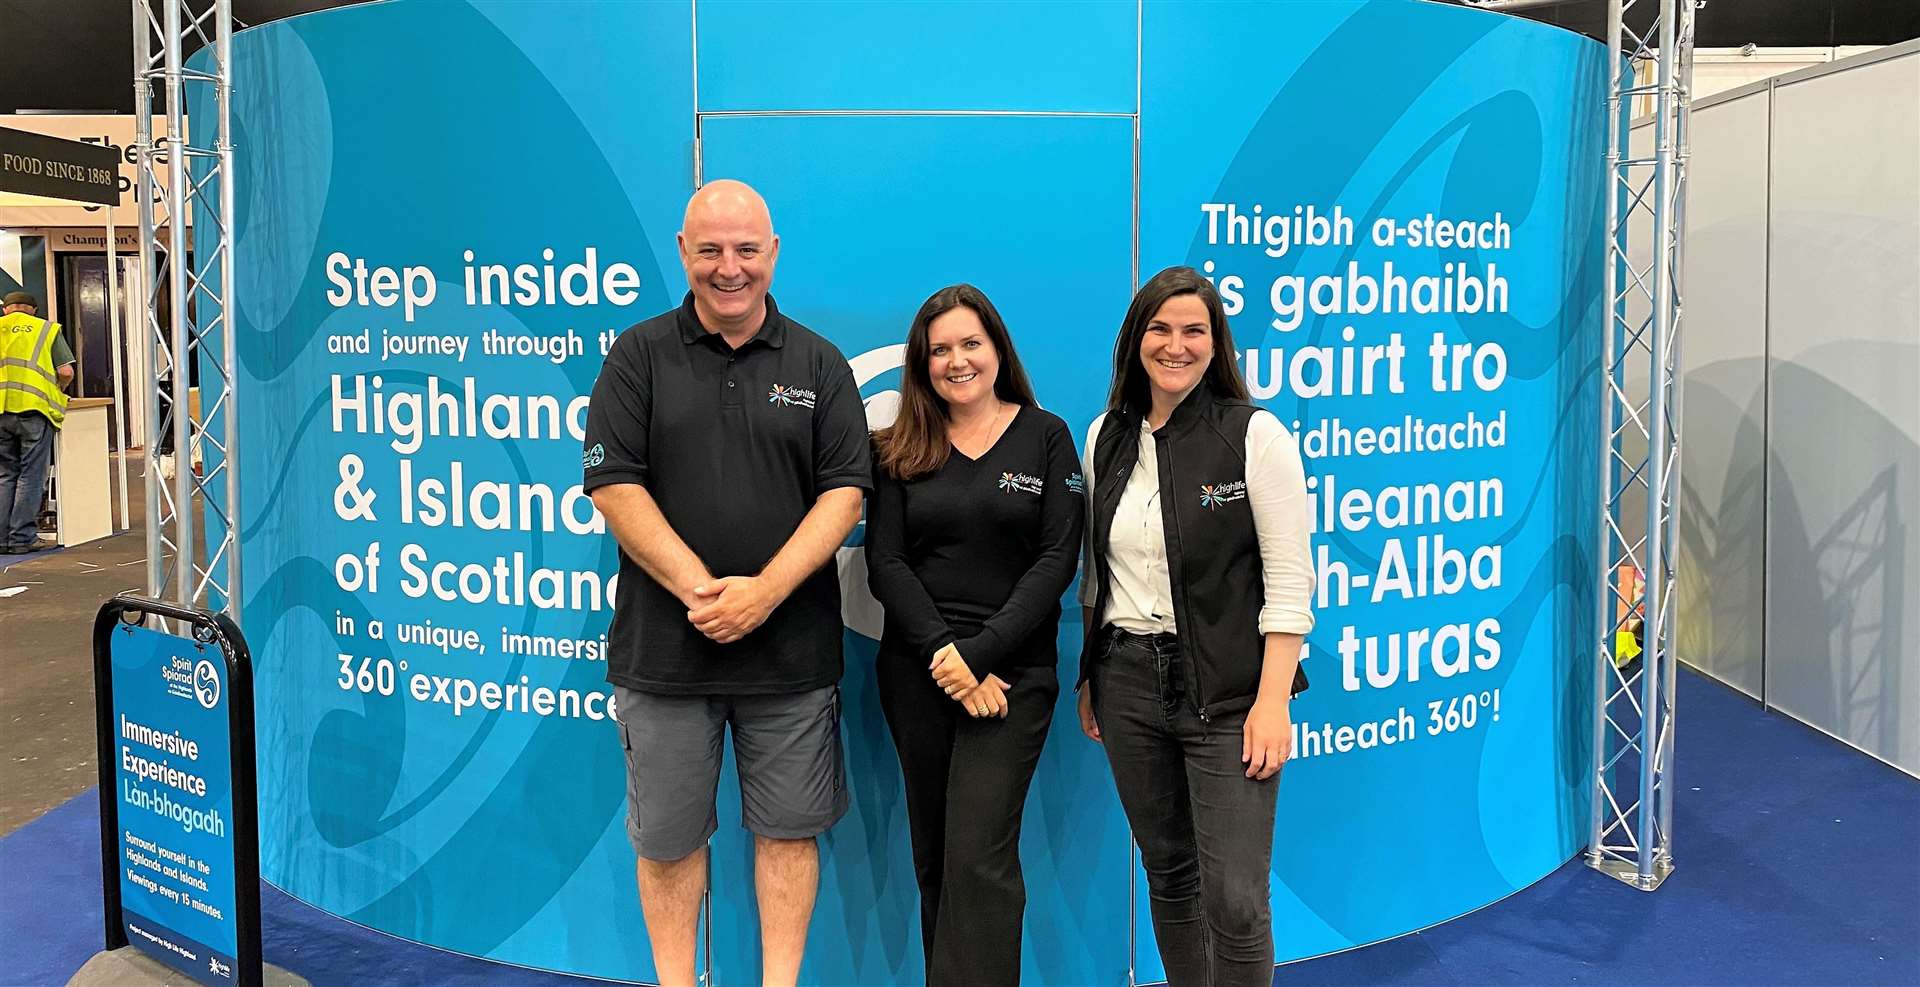 From left, Liam Christie, Mary Don Mohon and Stephanie Reith have worked on the Highland Islands Spirit Project and will be present at the show.